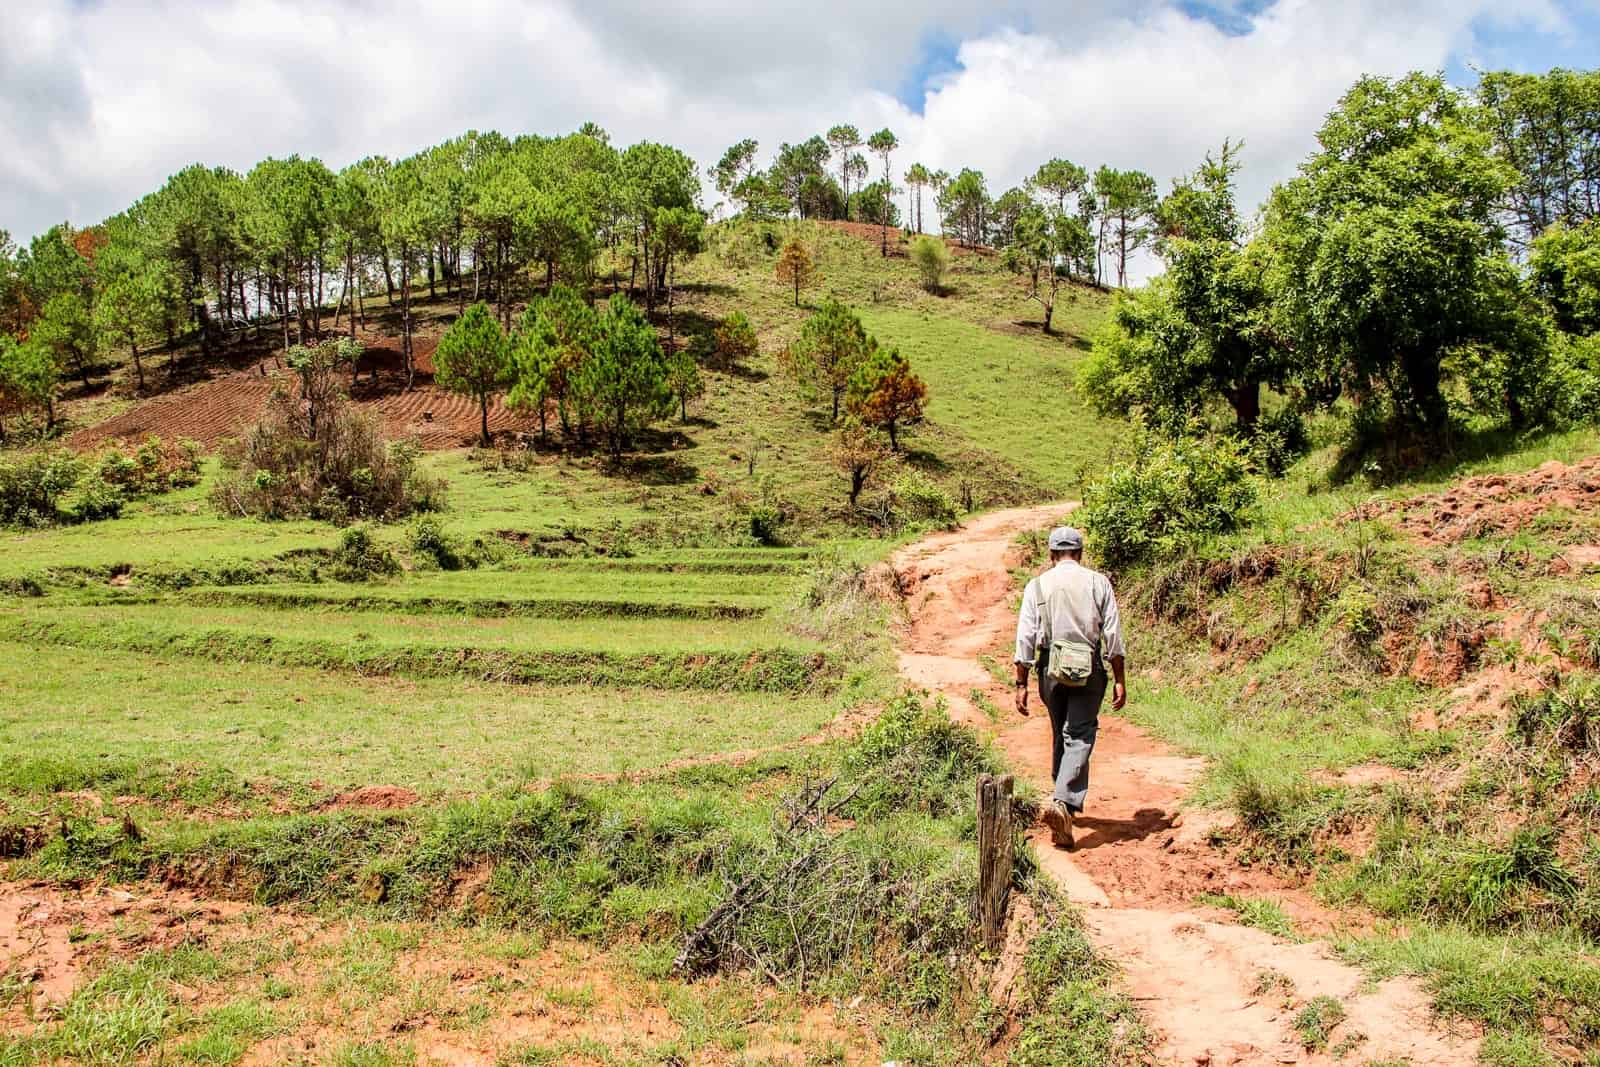 A male guide leads a group through rural Myanmar on an orange dirt road that cuts through rolling hills of green - part of a hike from Hsipaw to Kalaw in Myanmar